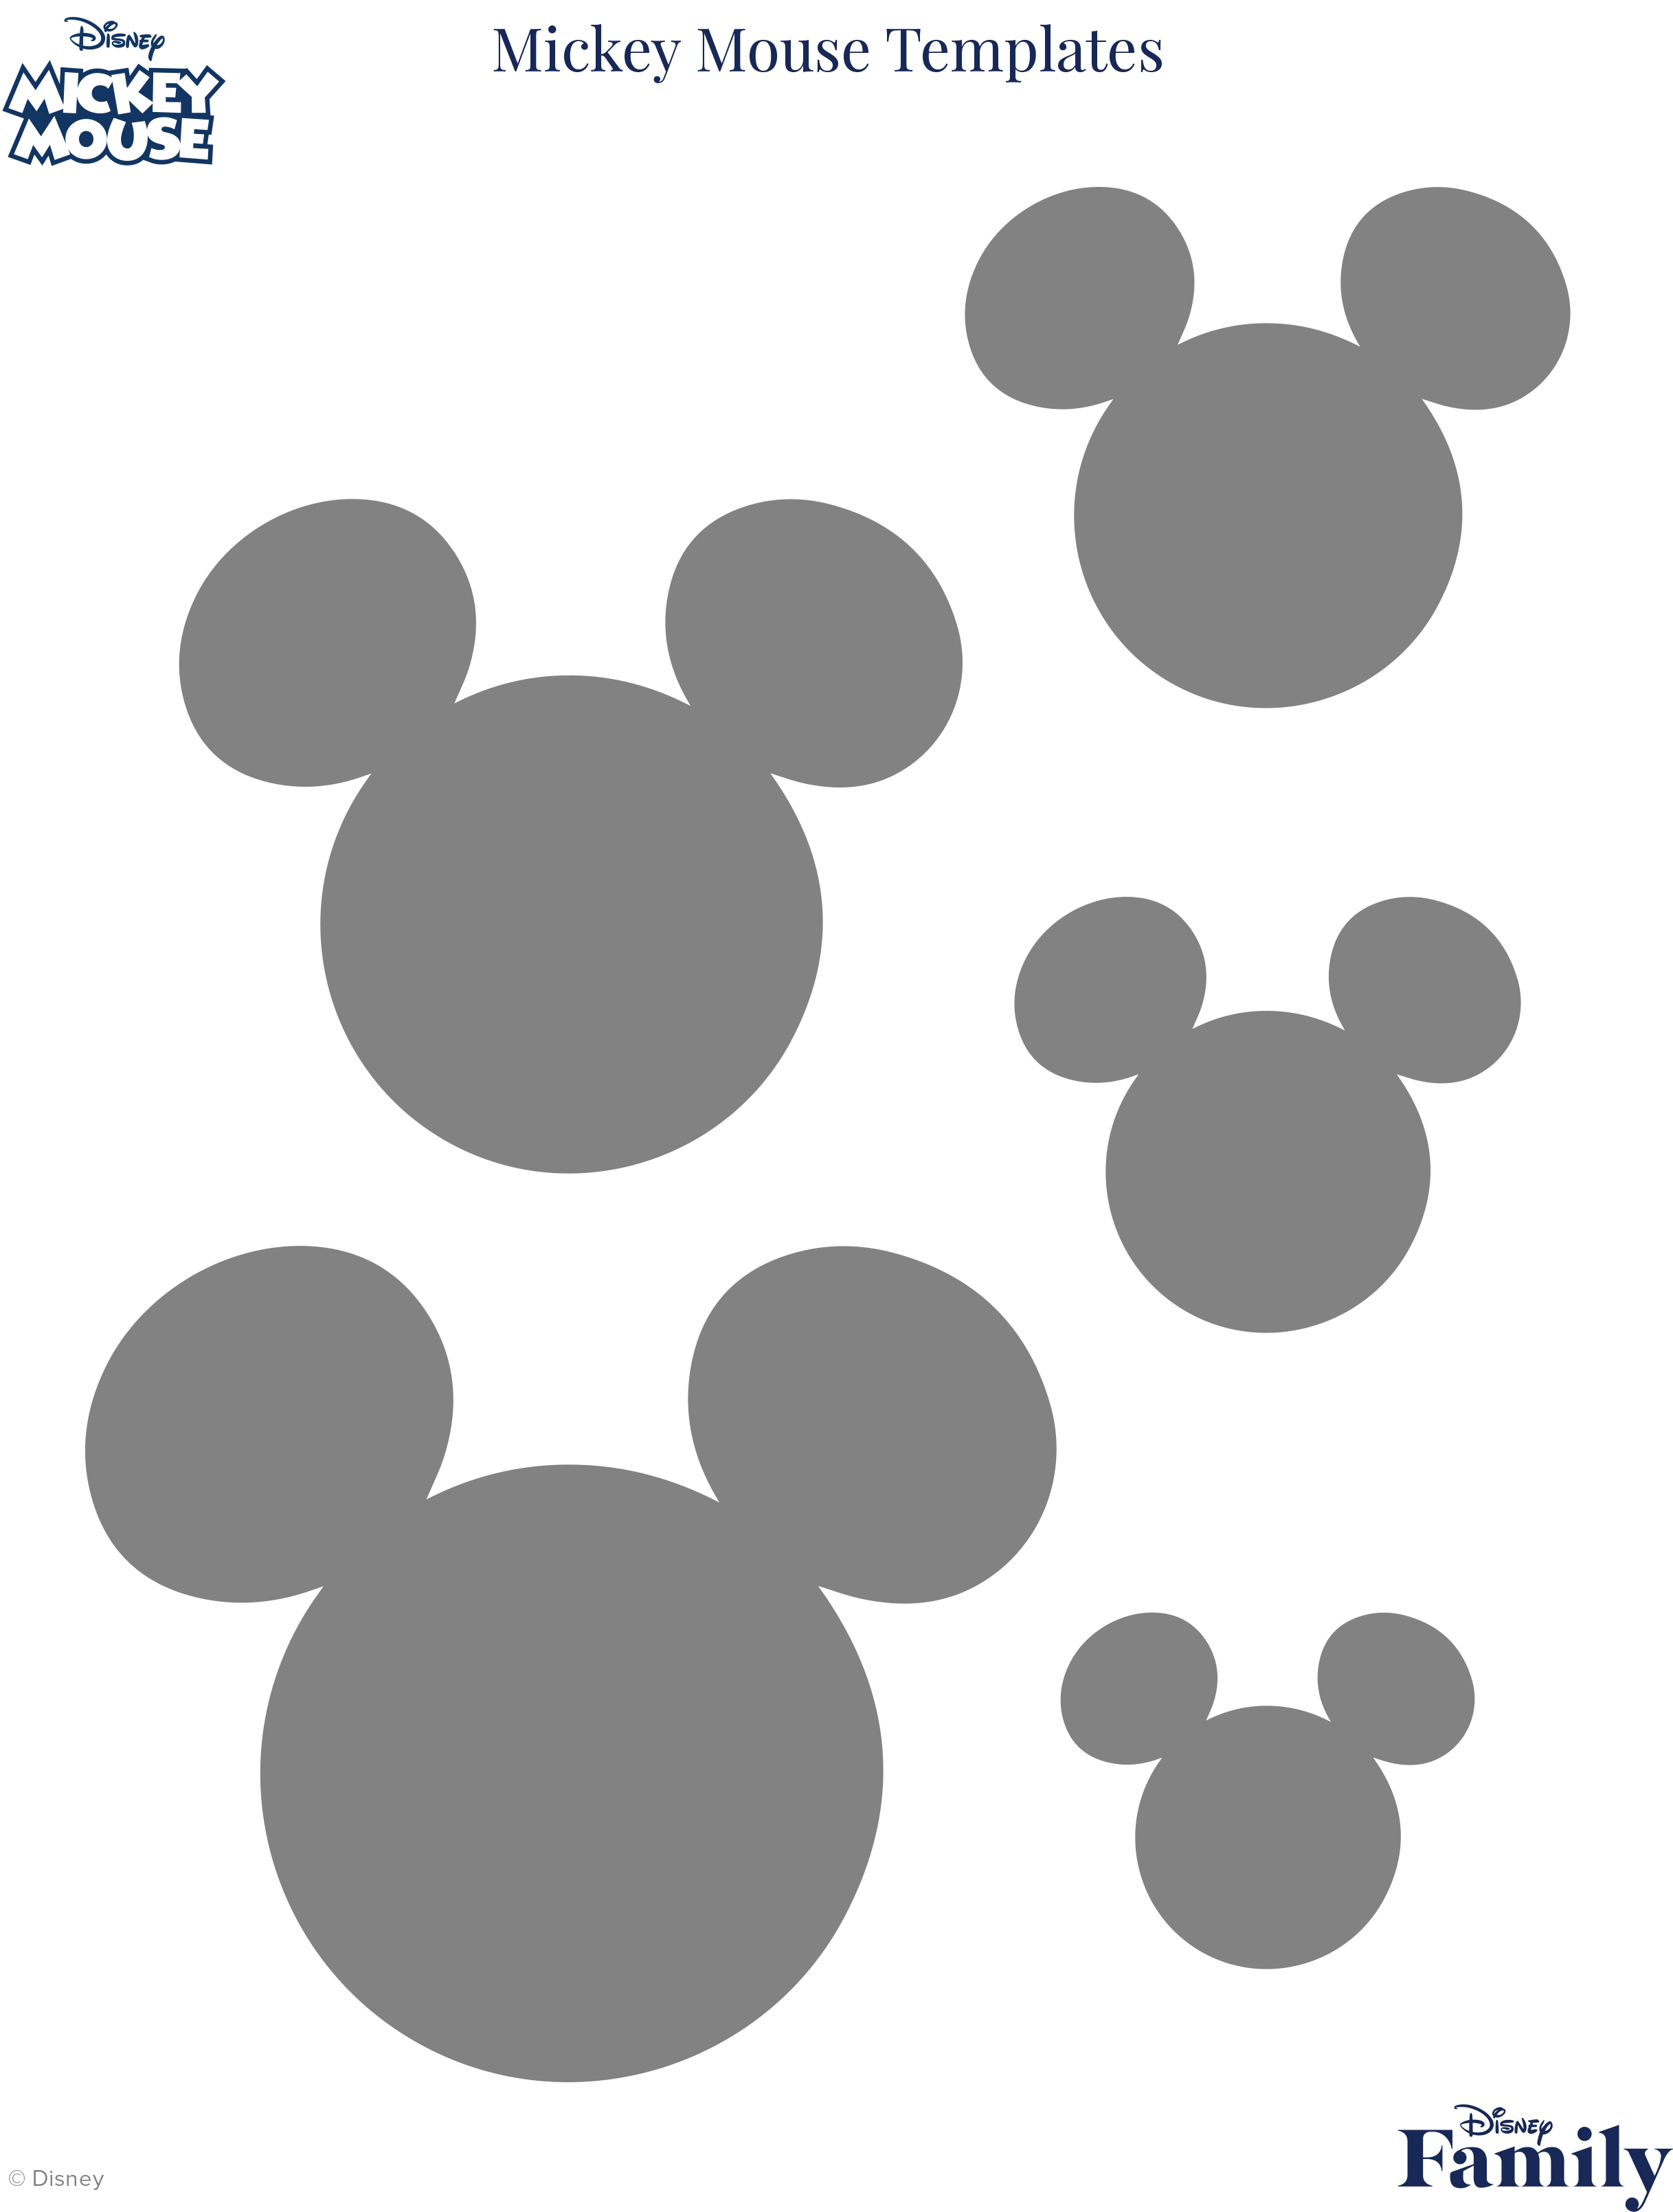 Mickey Mouse Template | Disney Family - Free Printable Mickey Mouse Head